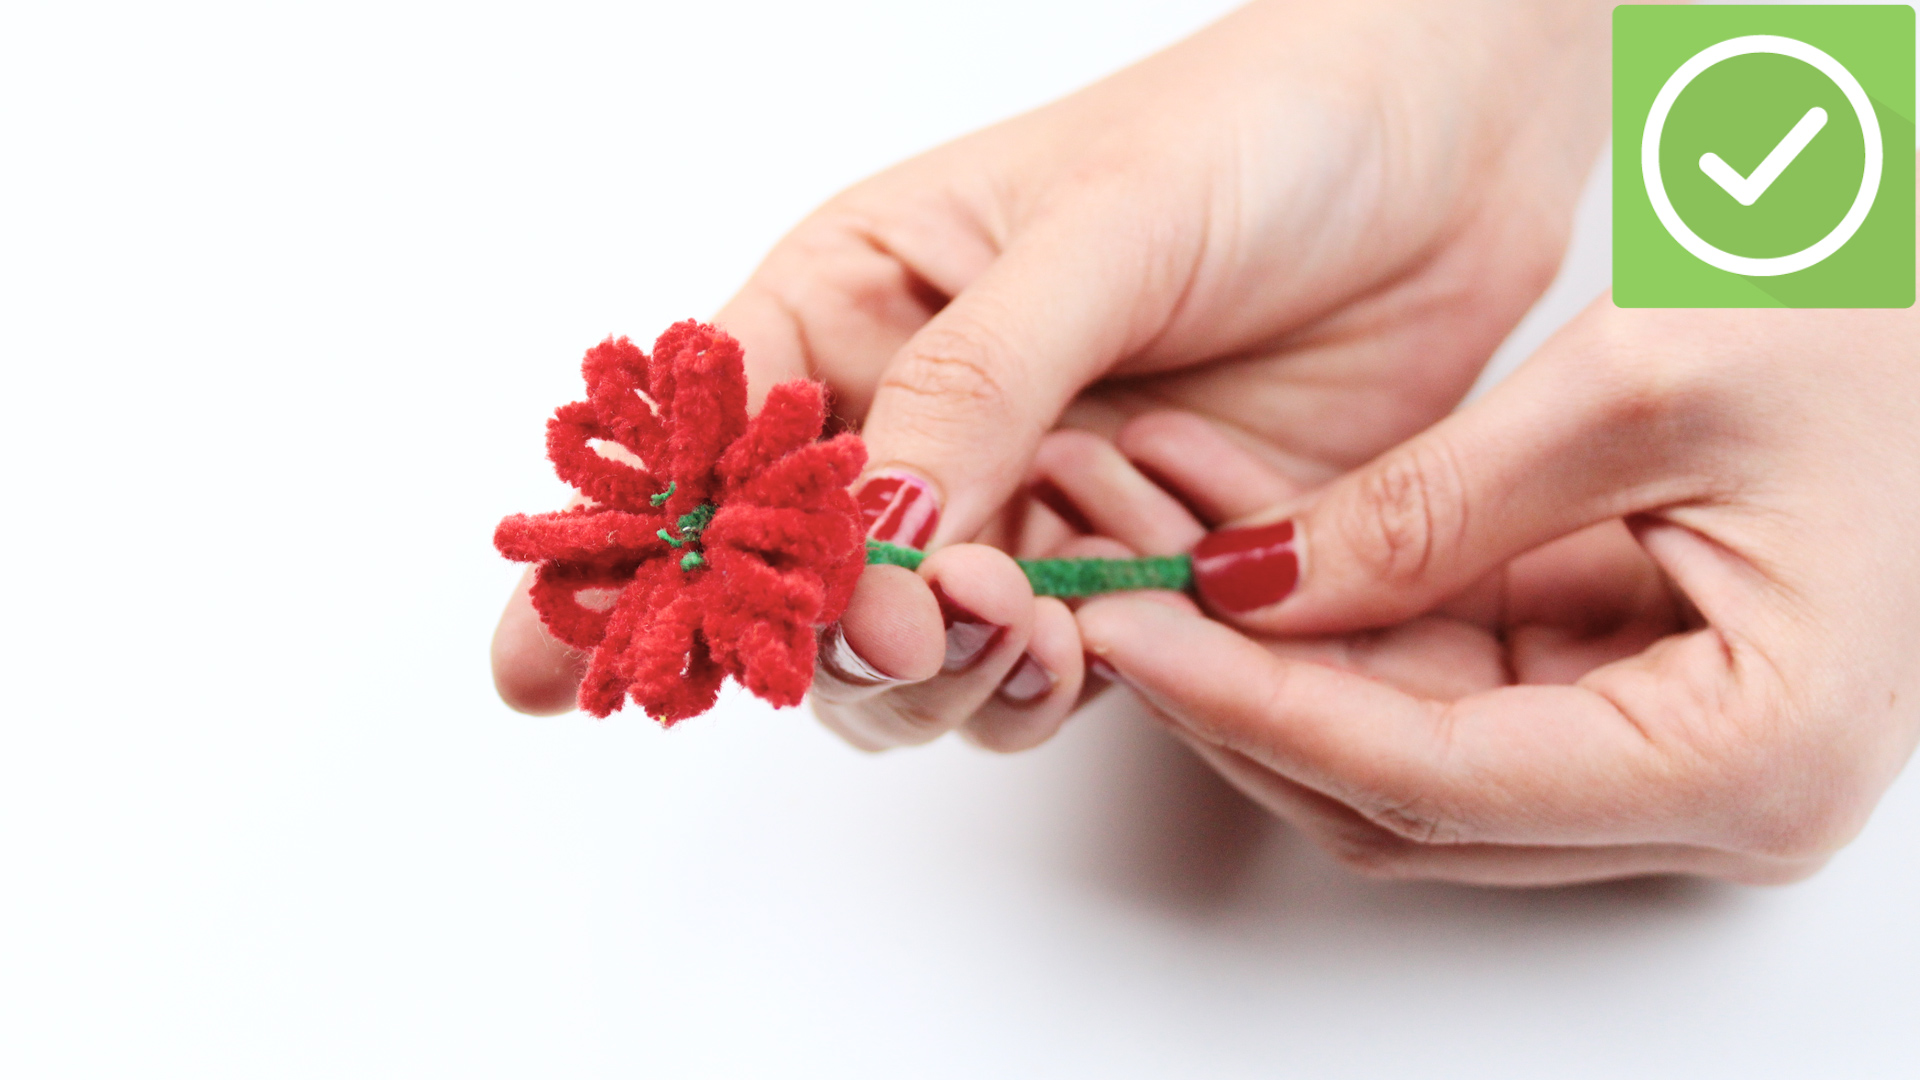 pipe cleaner flowers instructions